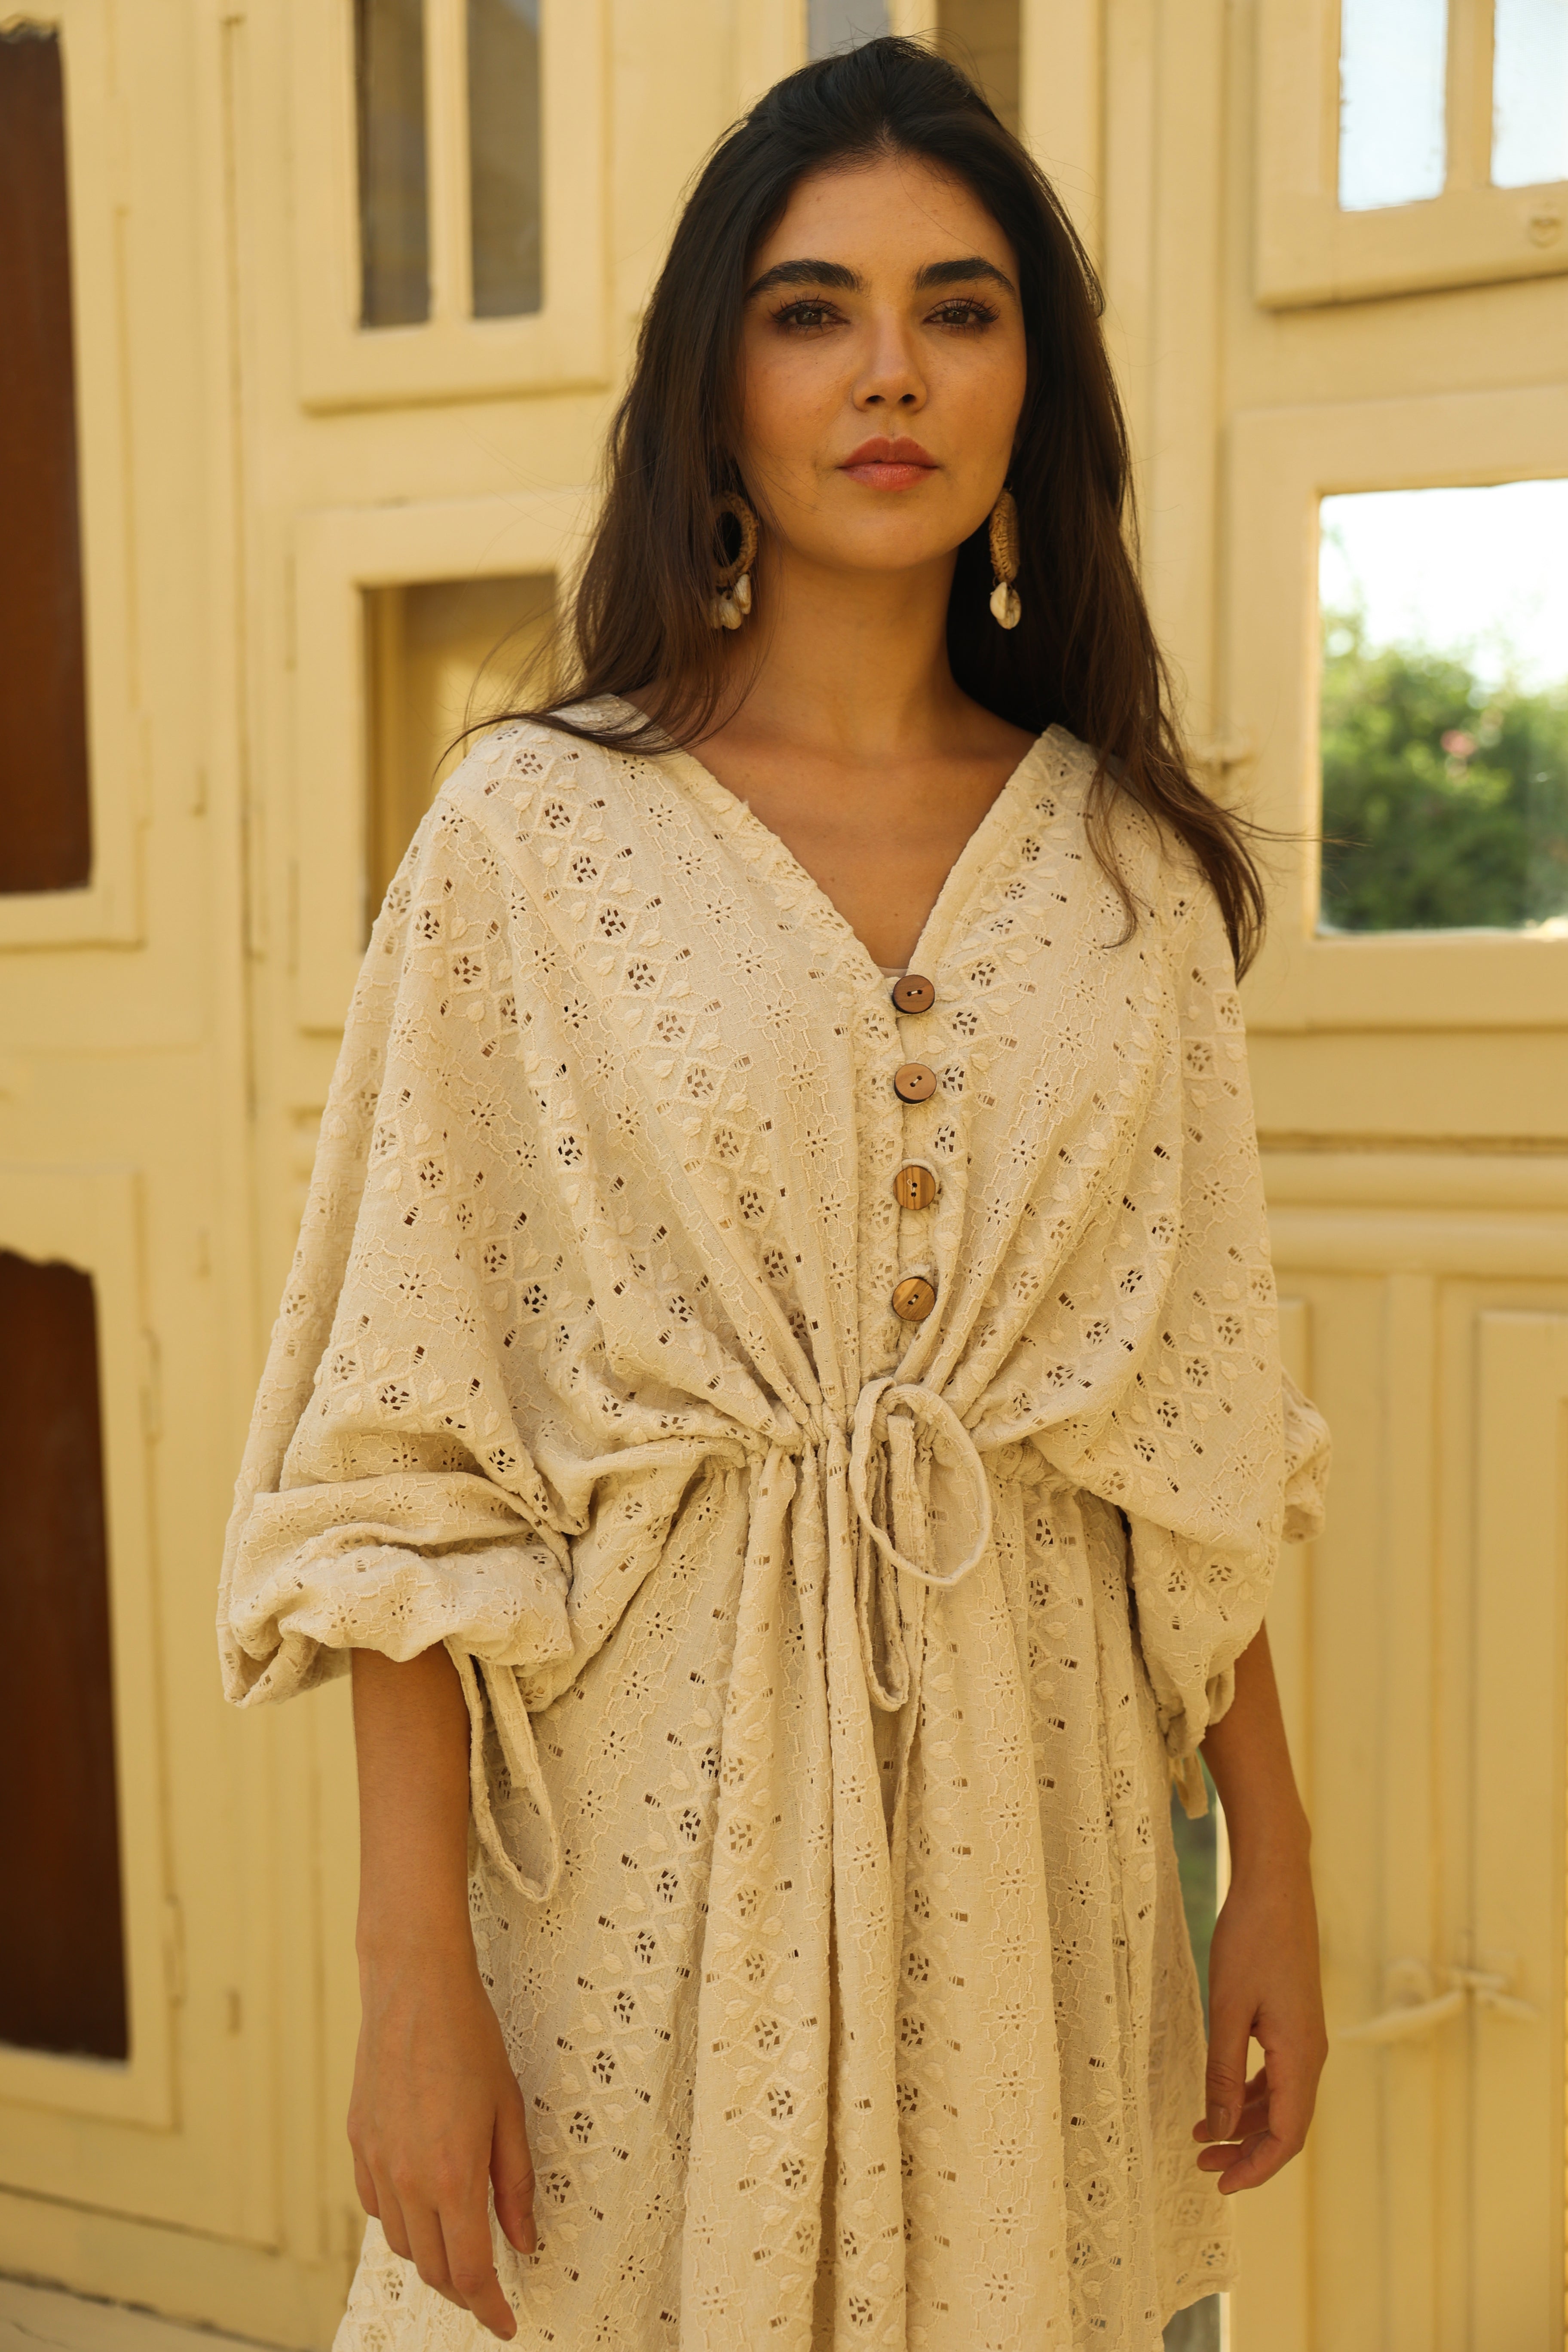 The Adjustable Airy Dress in Beige